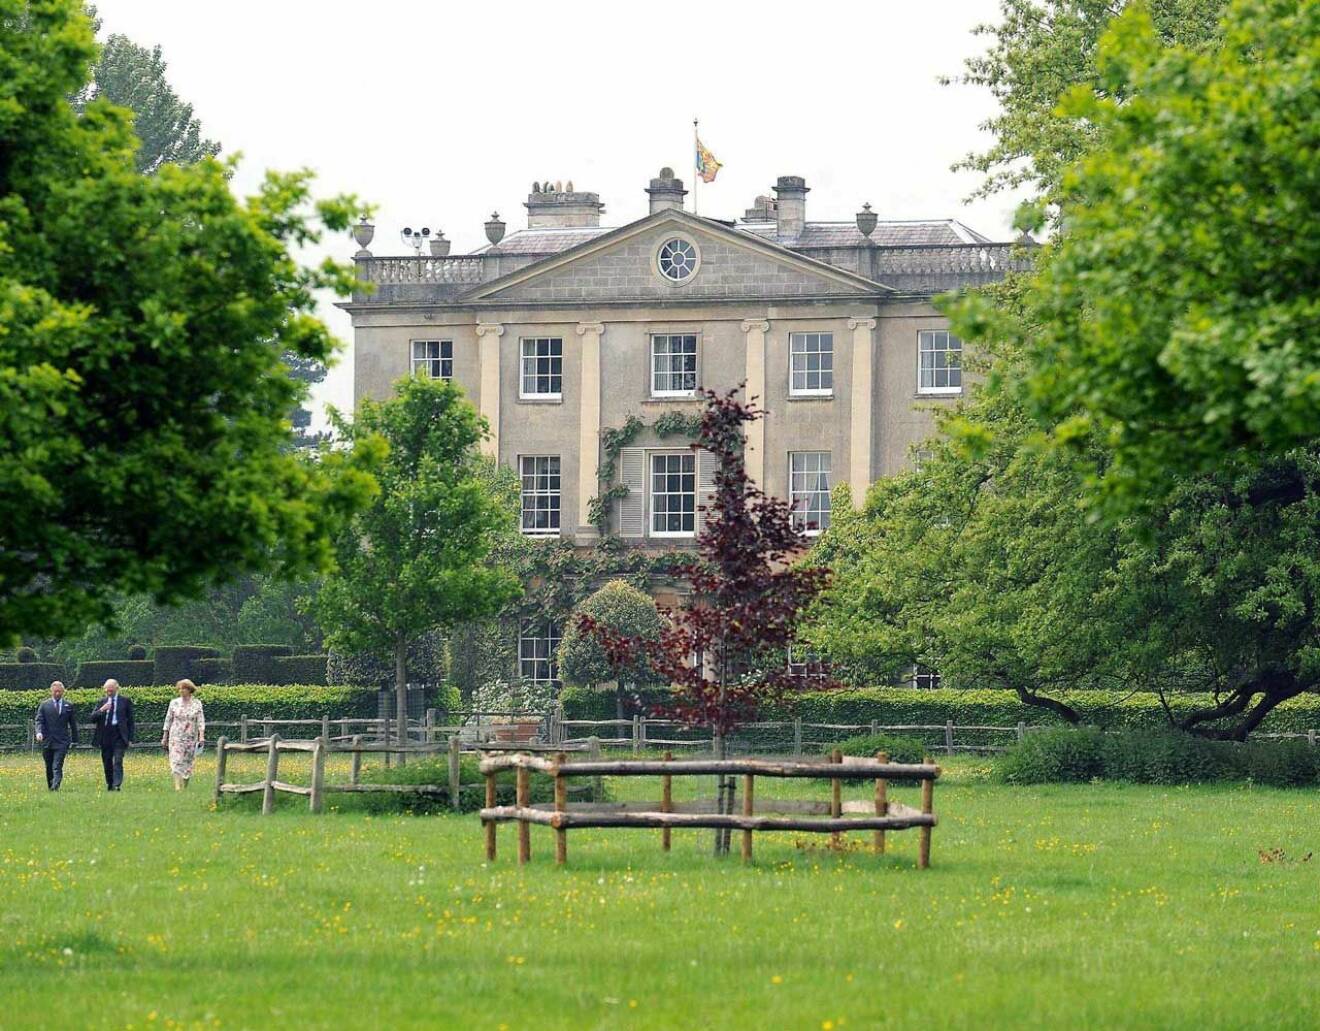 Prins Charles weekendresidens Highgrove i The Cotswolds.